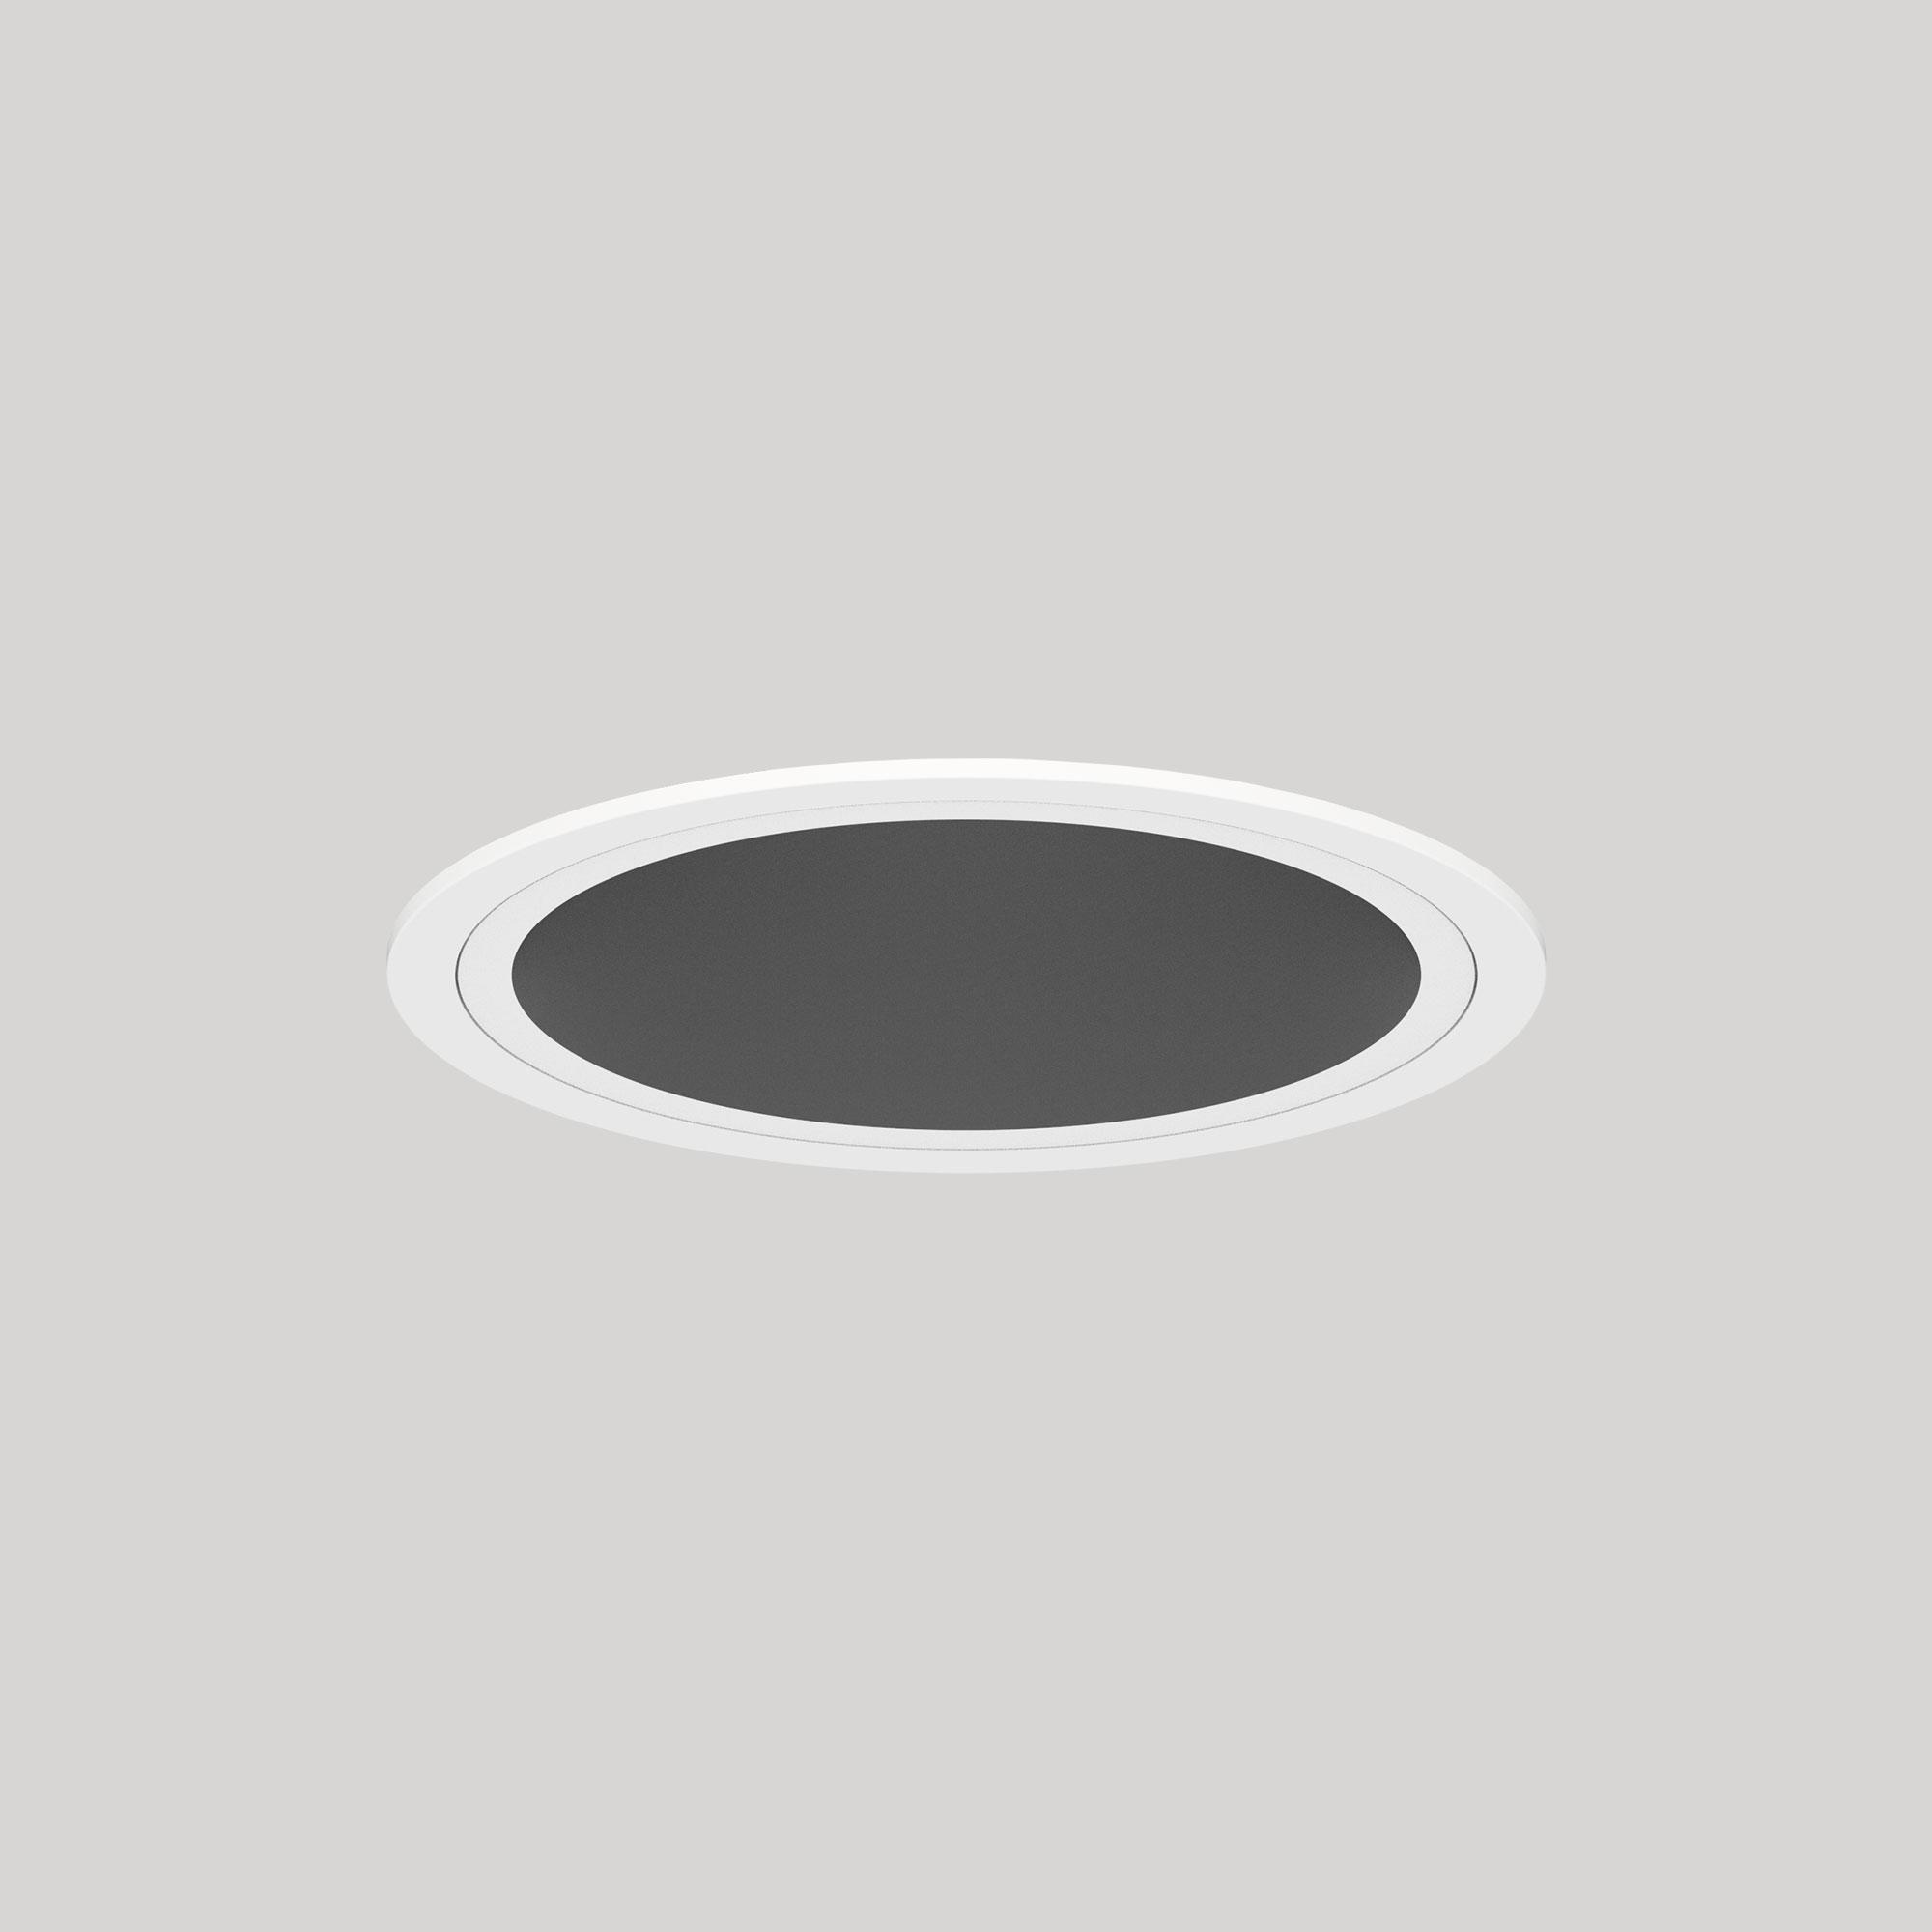 Standard 114mm Ceiling Recessed Round Fixed STD-E01C0C-WBP - Standard-STD-E01-WB-Installed.jpg